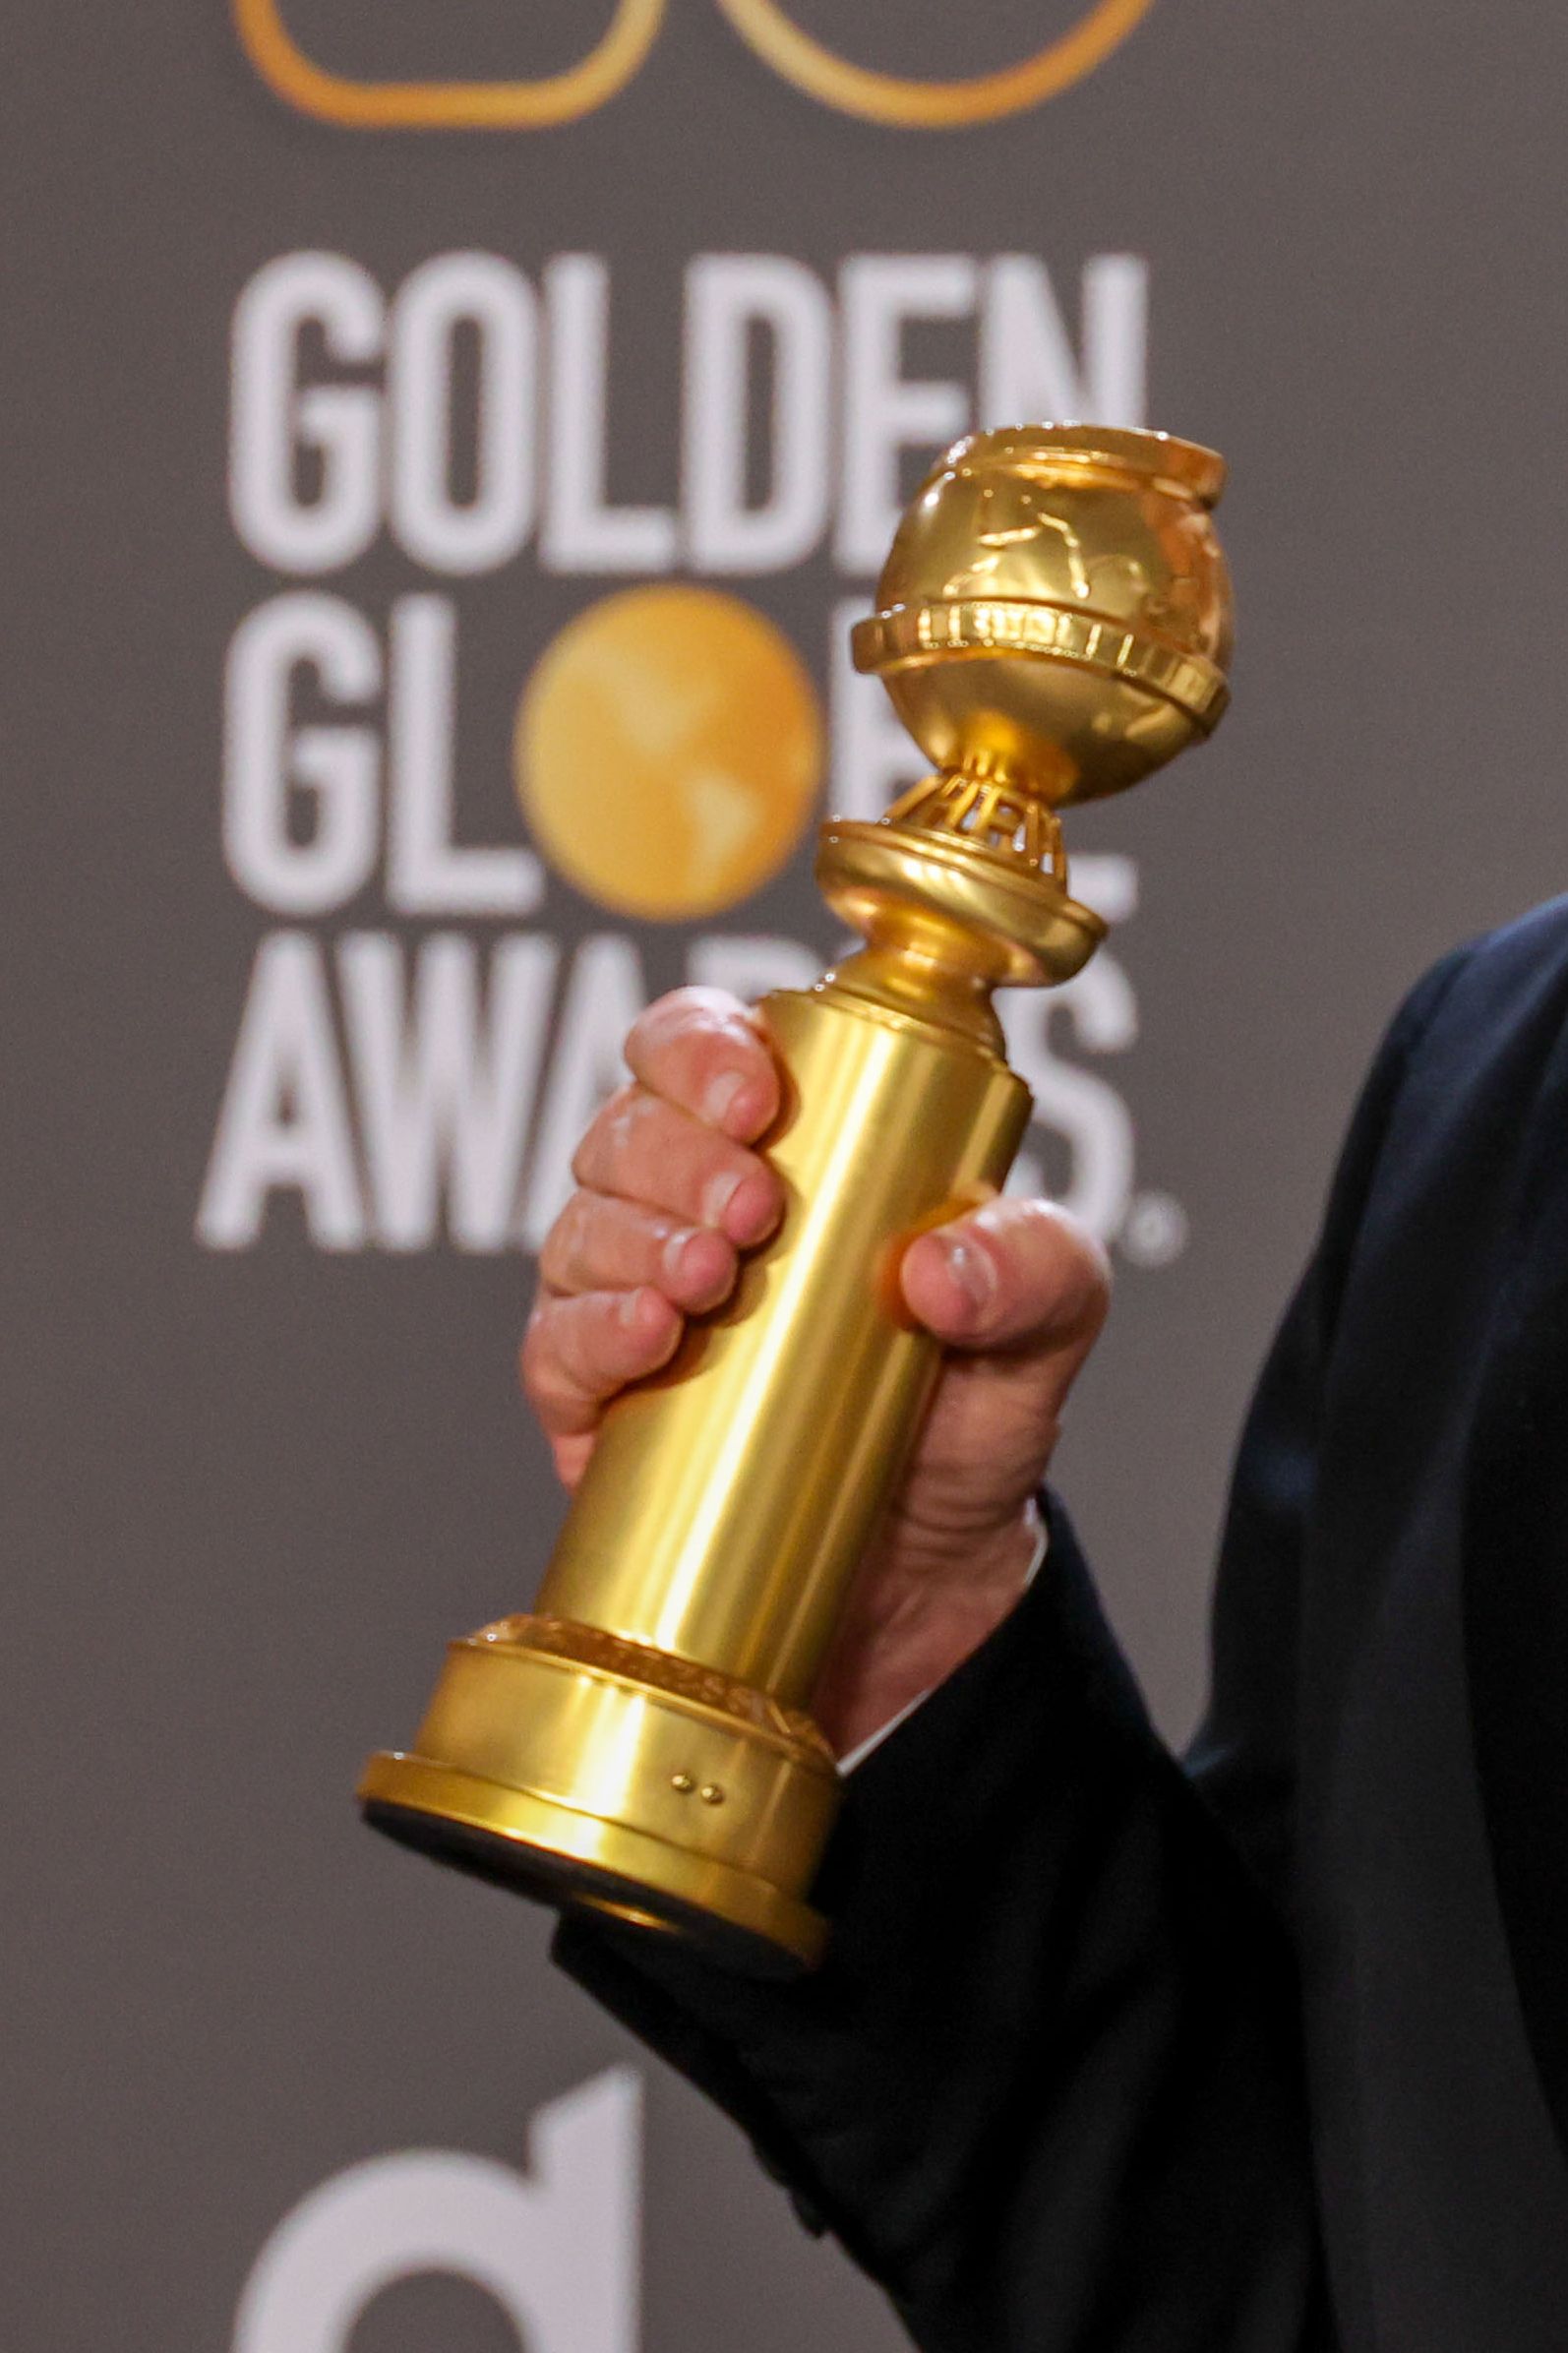 Golden Globes Acquired by Dick Clark, HFPA Dissolving